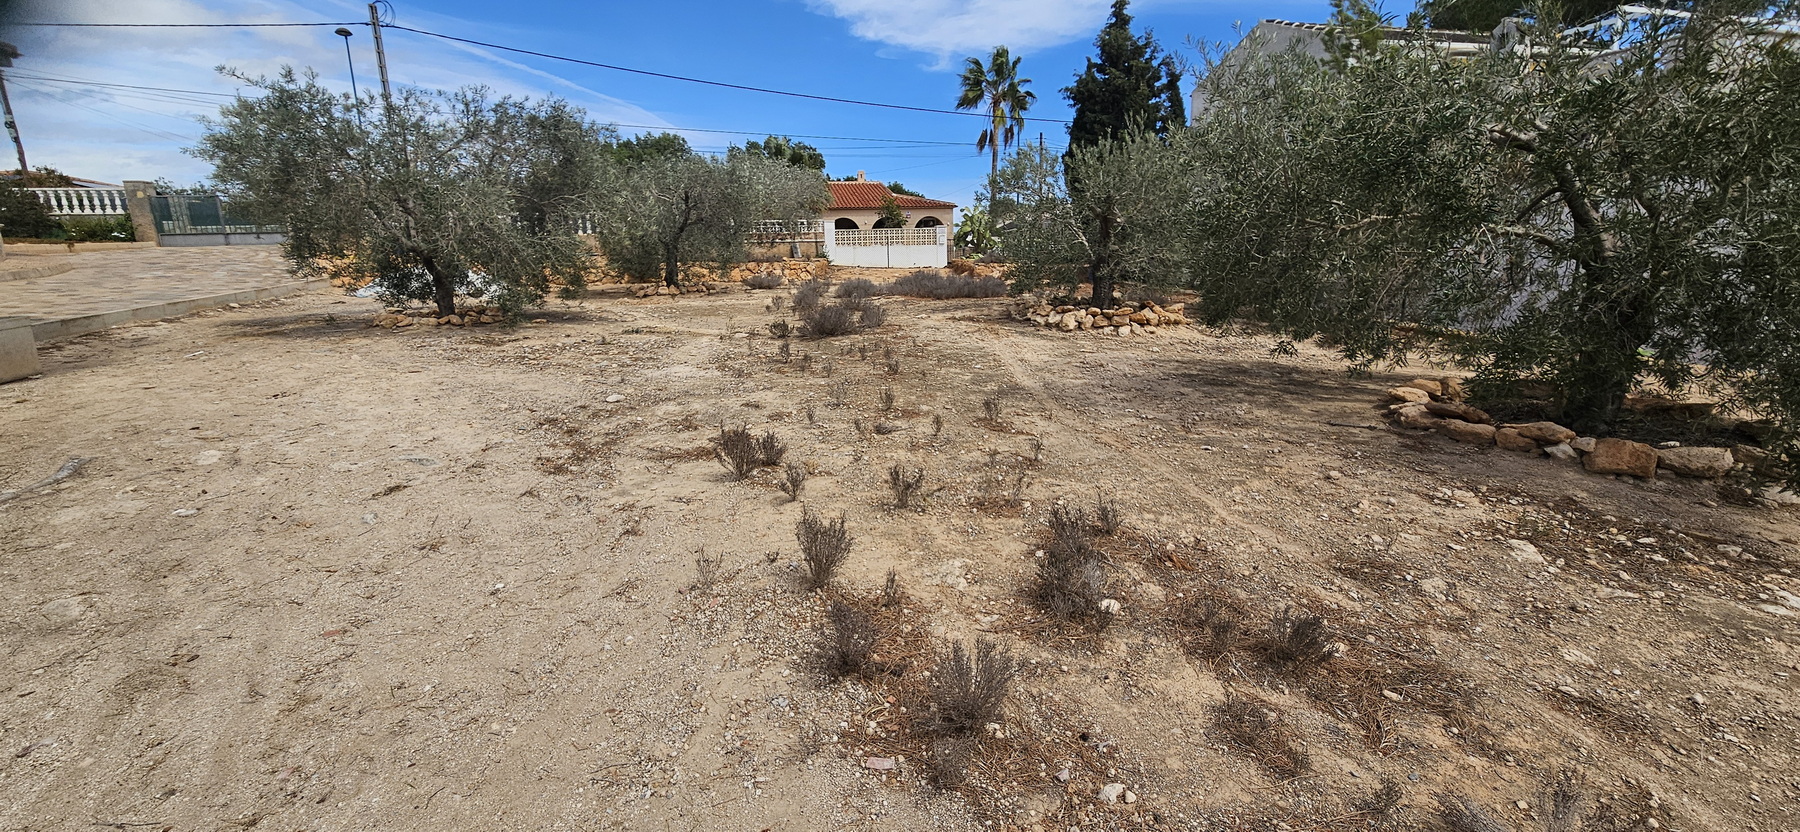 Plot for sale in Pinar de Campoverde by Pinar Properties